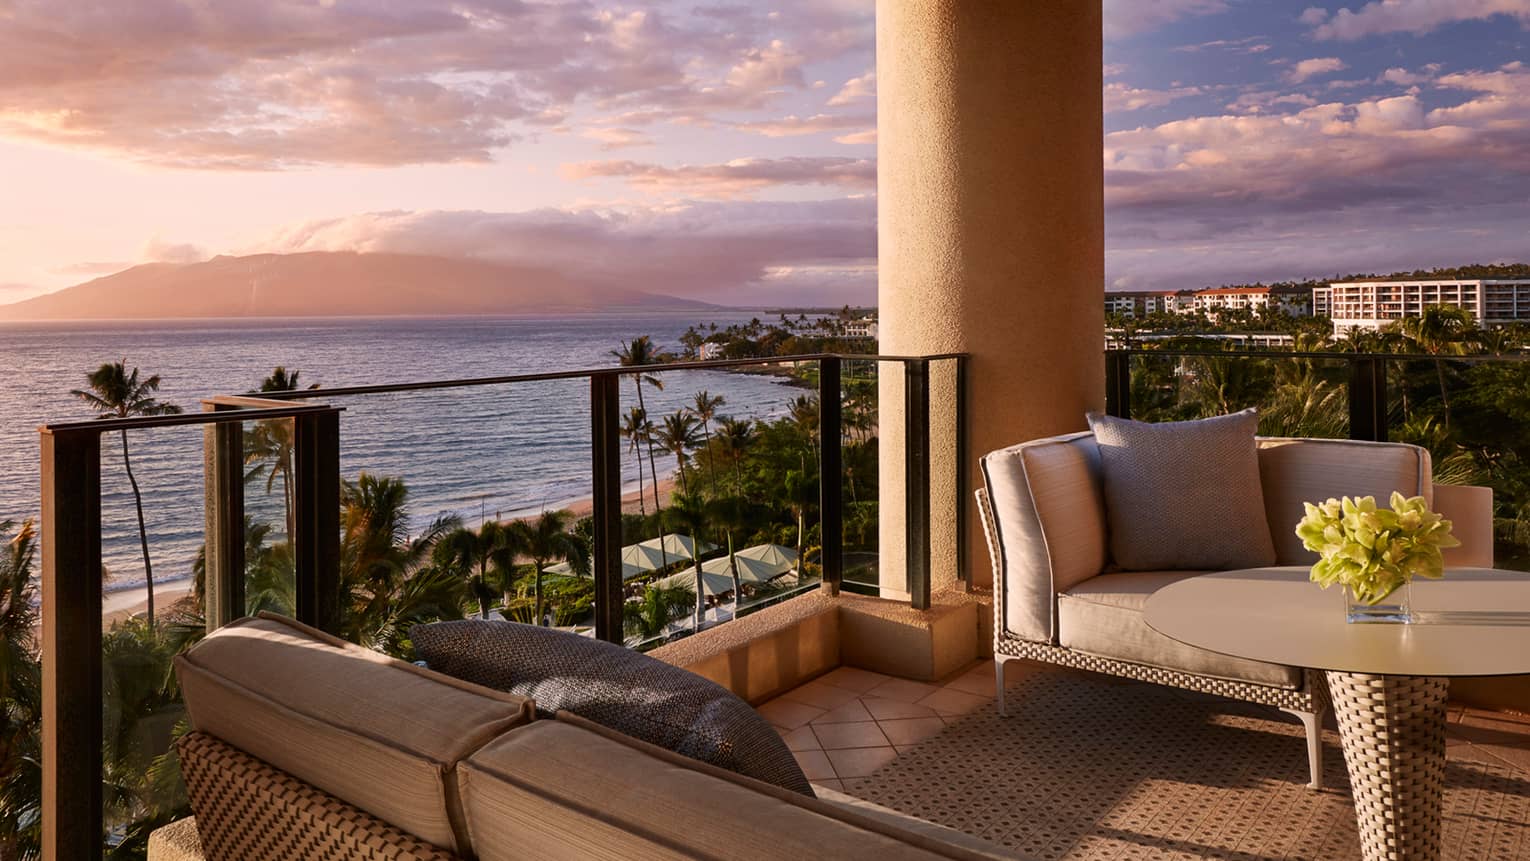 Balcony with wicker patio furniture, brown cushions in front of ocean view at sunset